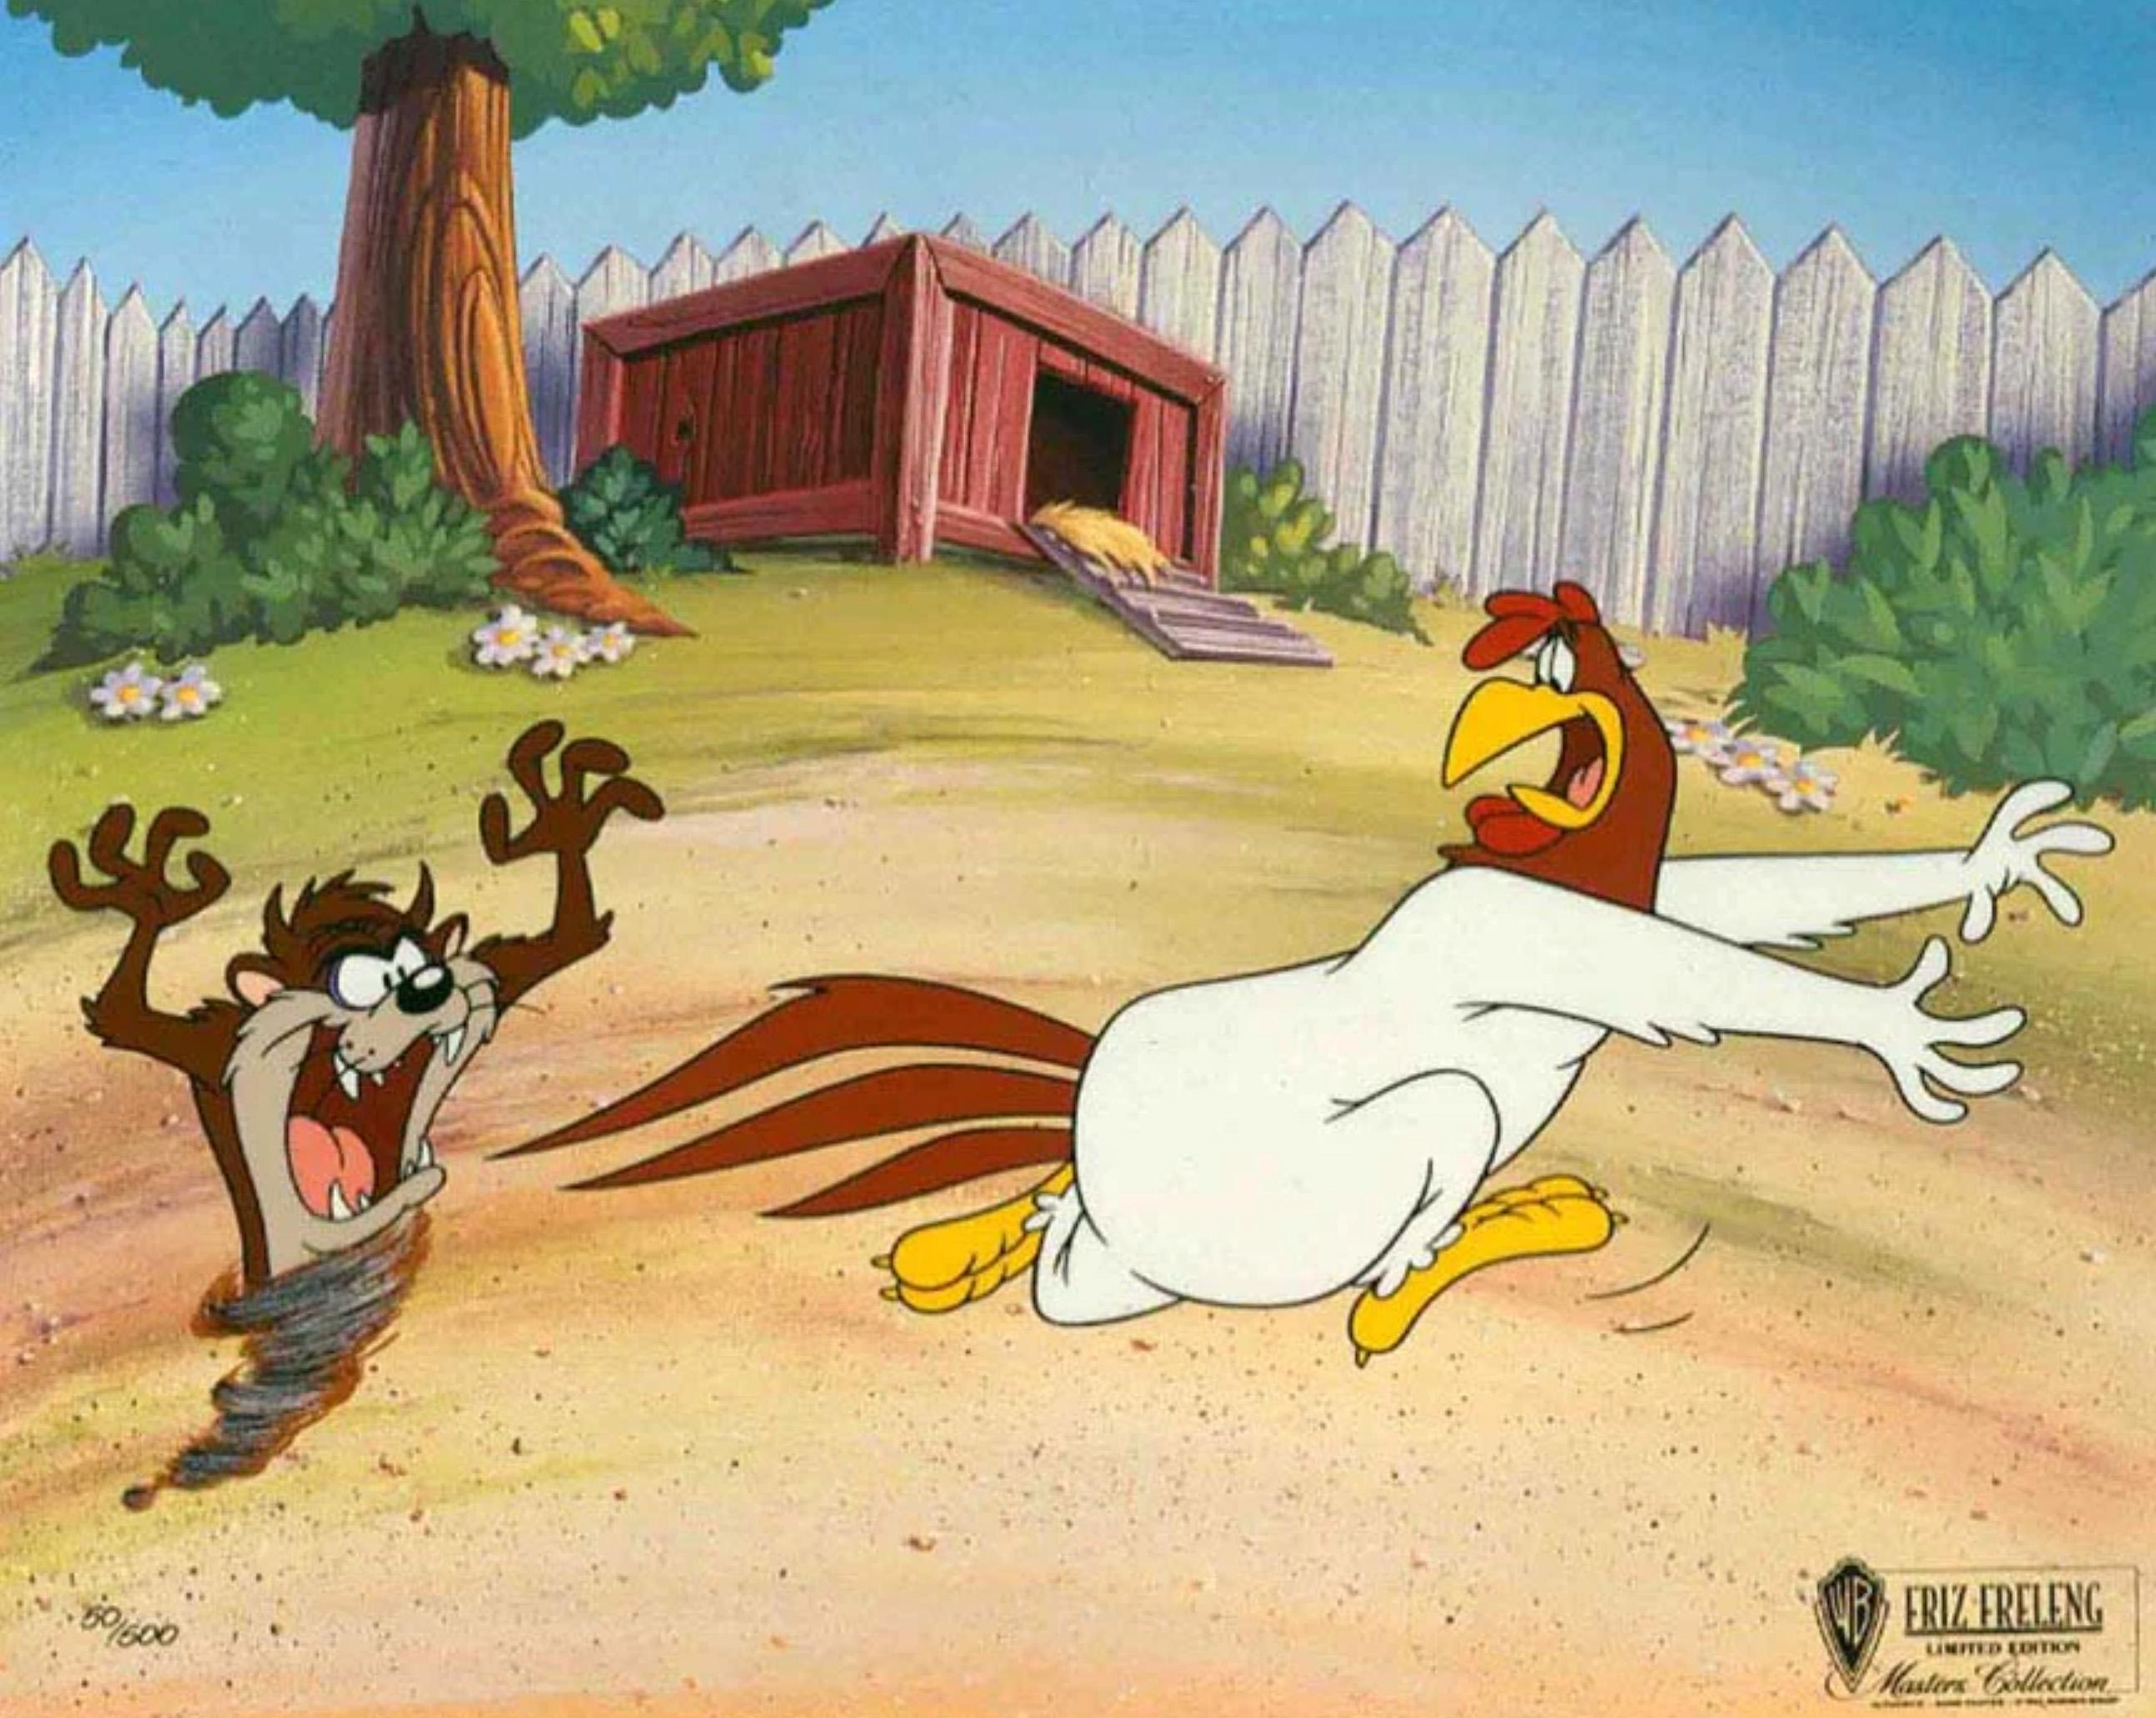 CHICKEN TONIGHT

MEDIUM:  Limited Edition Cel
SIZE: 10.5" x 12.5"
EDITION SIZE: 500
ARTIST: Friz Freleng
SKU: FF1042

ABOUT THE IMAGE: Face it, when Taz is hungry, anything looks good, even a fat, loquacious, overbearing rooster like Foghorn